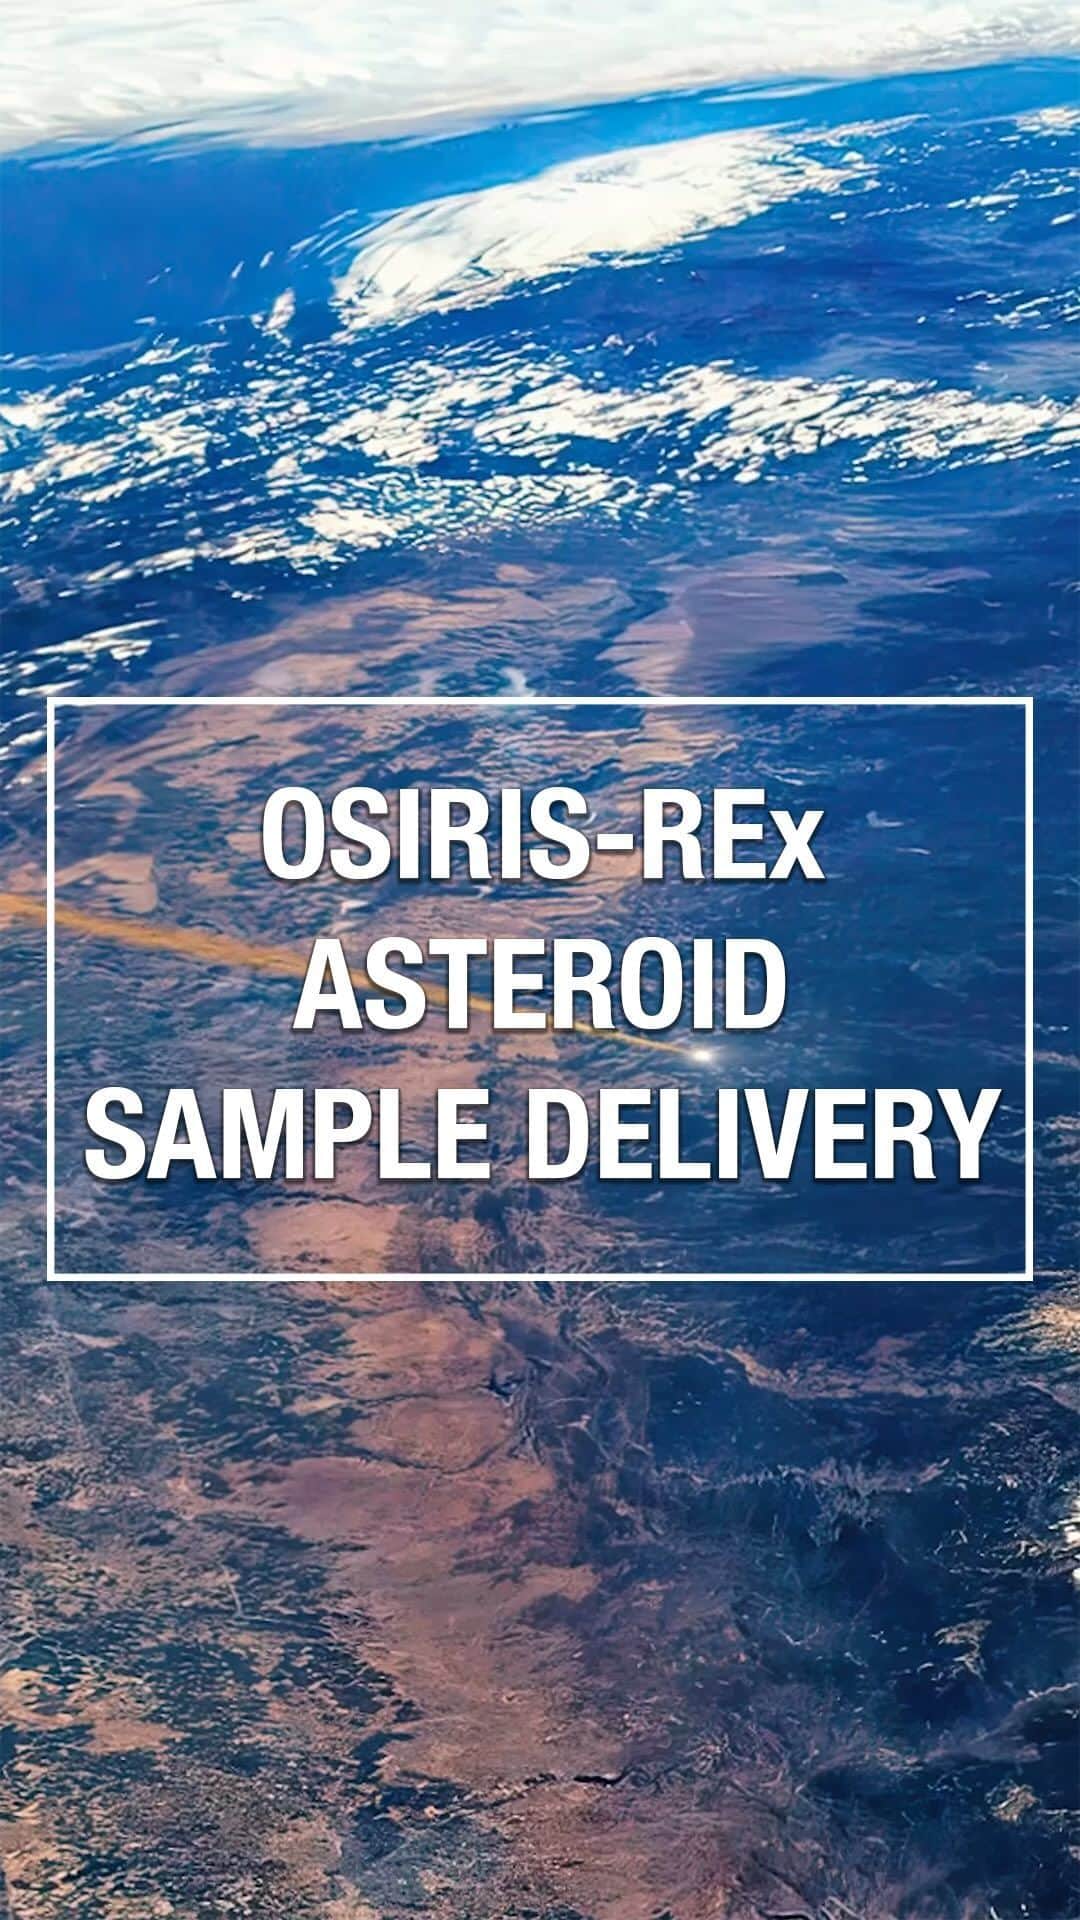 NASAのインスタグラム：「Space rocks! …really, that’s what we’re waiting for.   Tomorrow, Sept. 24, #OSIRISREx will deliver a sample of asteroid Bennu to Earth!  Watch the sample arrive, Sept. 24 at 10 a.m. ET on NASA TV, the NASA App, or on social media on X, Facebook, YouTube, or Twitch.  This is @NASA’s first asteroid sample return mission and the largest sample ever collected from beyond the Moon.  The asteroid is a remnant from the tumultuous formation of the solar system, unlike any rocks we can find on Earth. Bennu’s rocks offer us insight into our own history – a time about 4.5 billion years ago when Earth was first forming.」